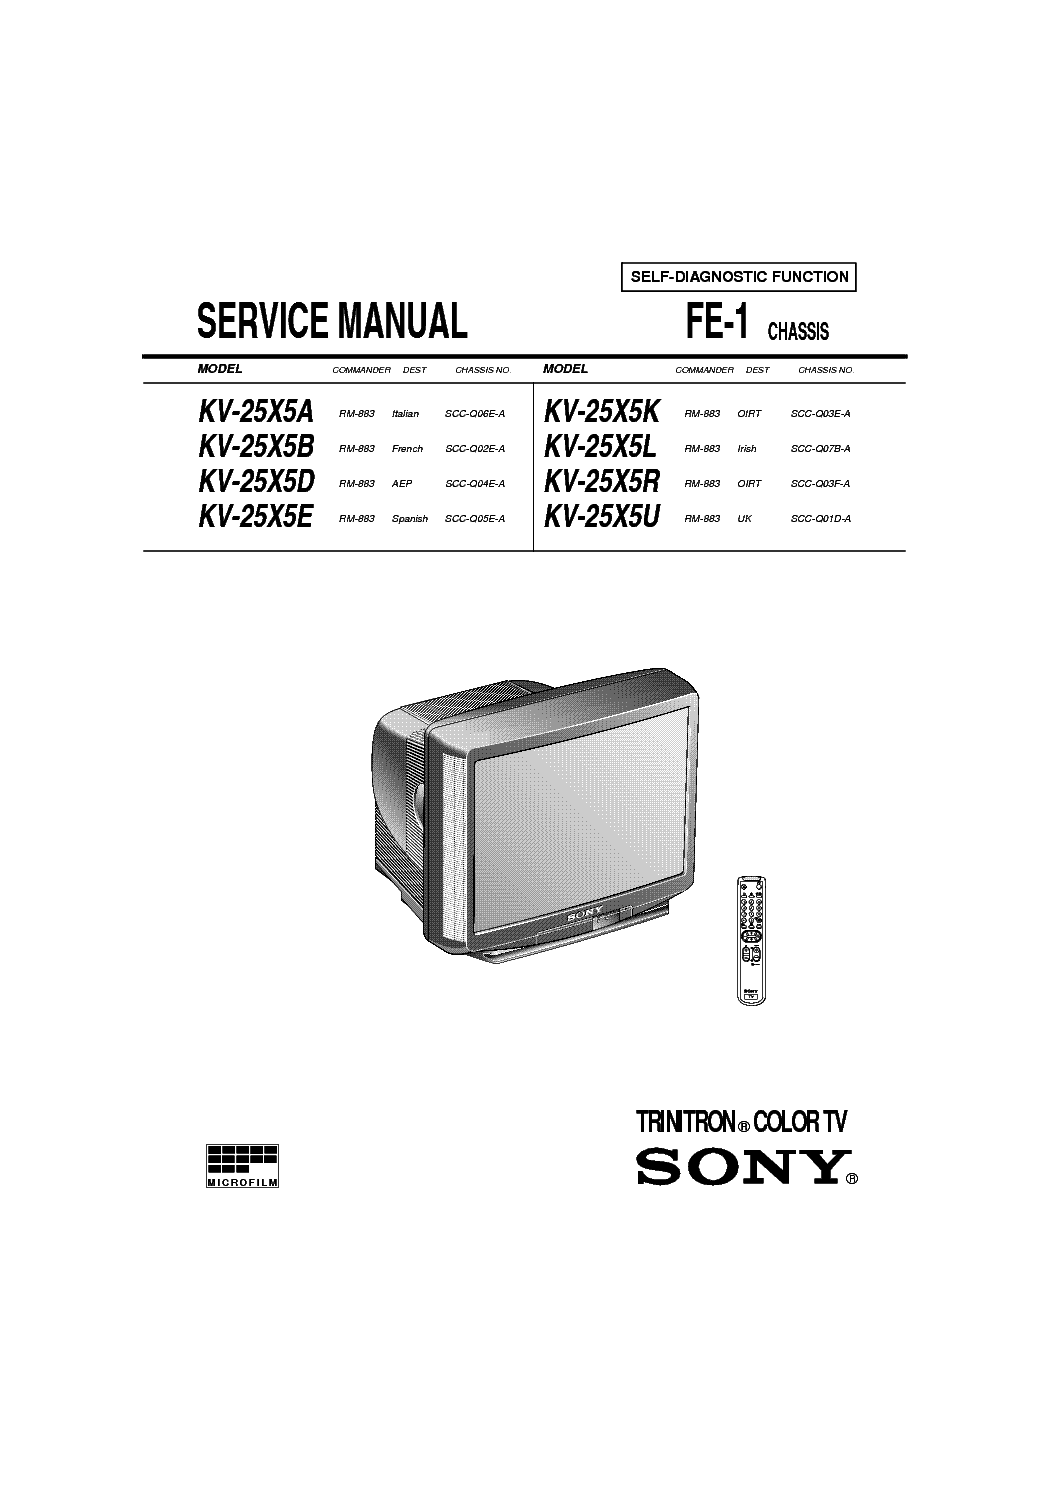 SONY KV-25X5B-CHASSIS-FE-1 service manual (1st page)